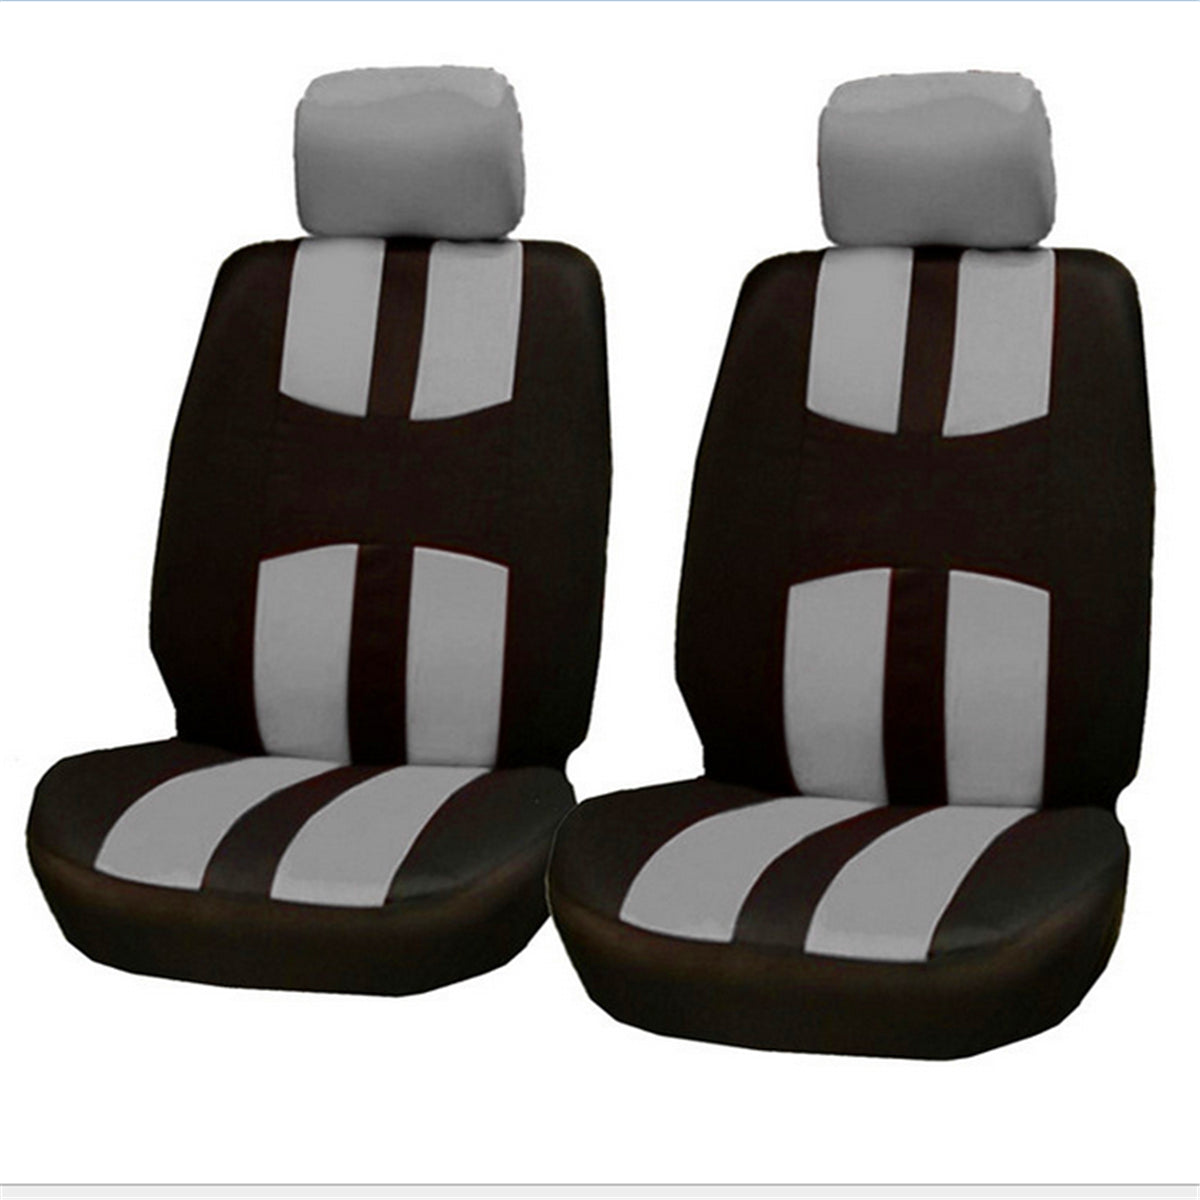 Full Set Car Seat Cover Polyester For Auto Truck SUV 2 Heads Breathable 3D Air Mesh Fabric - Auto GoShop